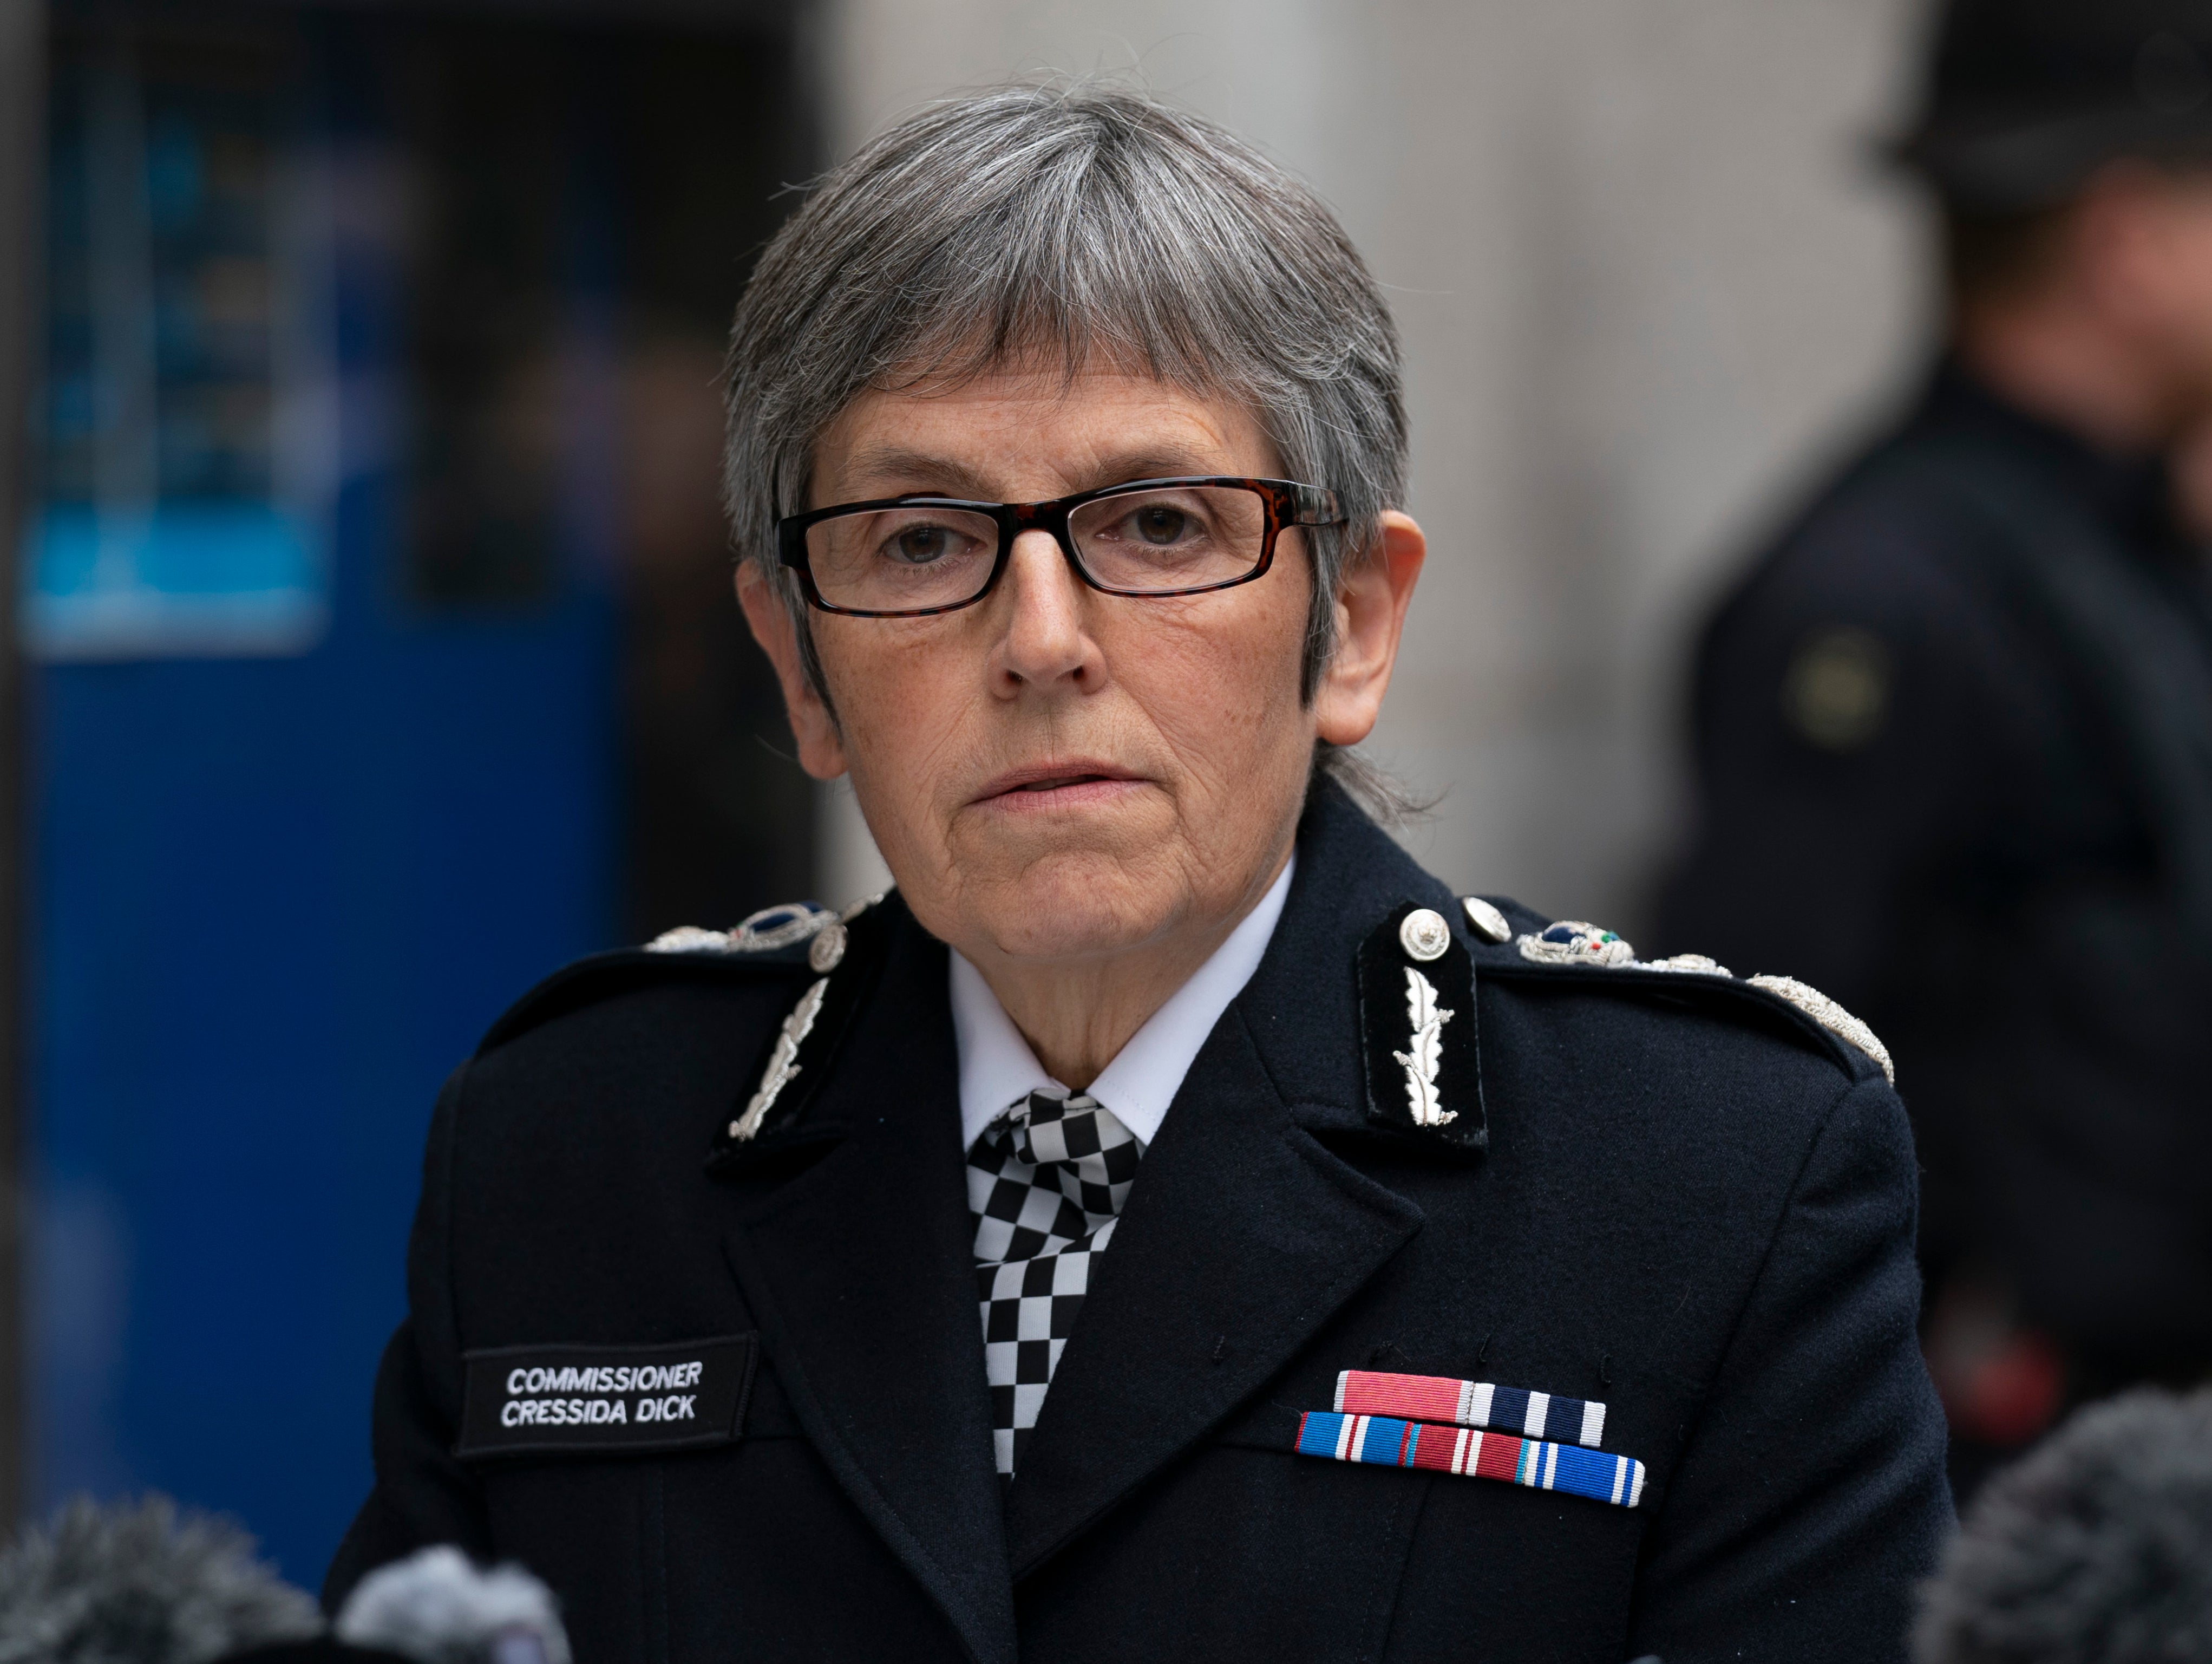 The Met Police commissioner has faced calls to step down